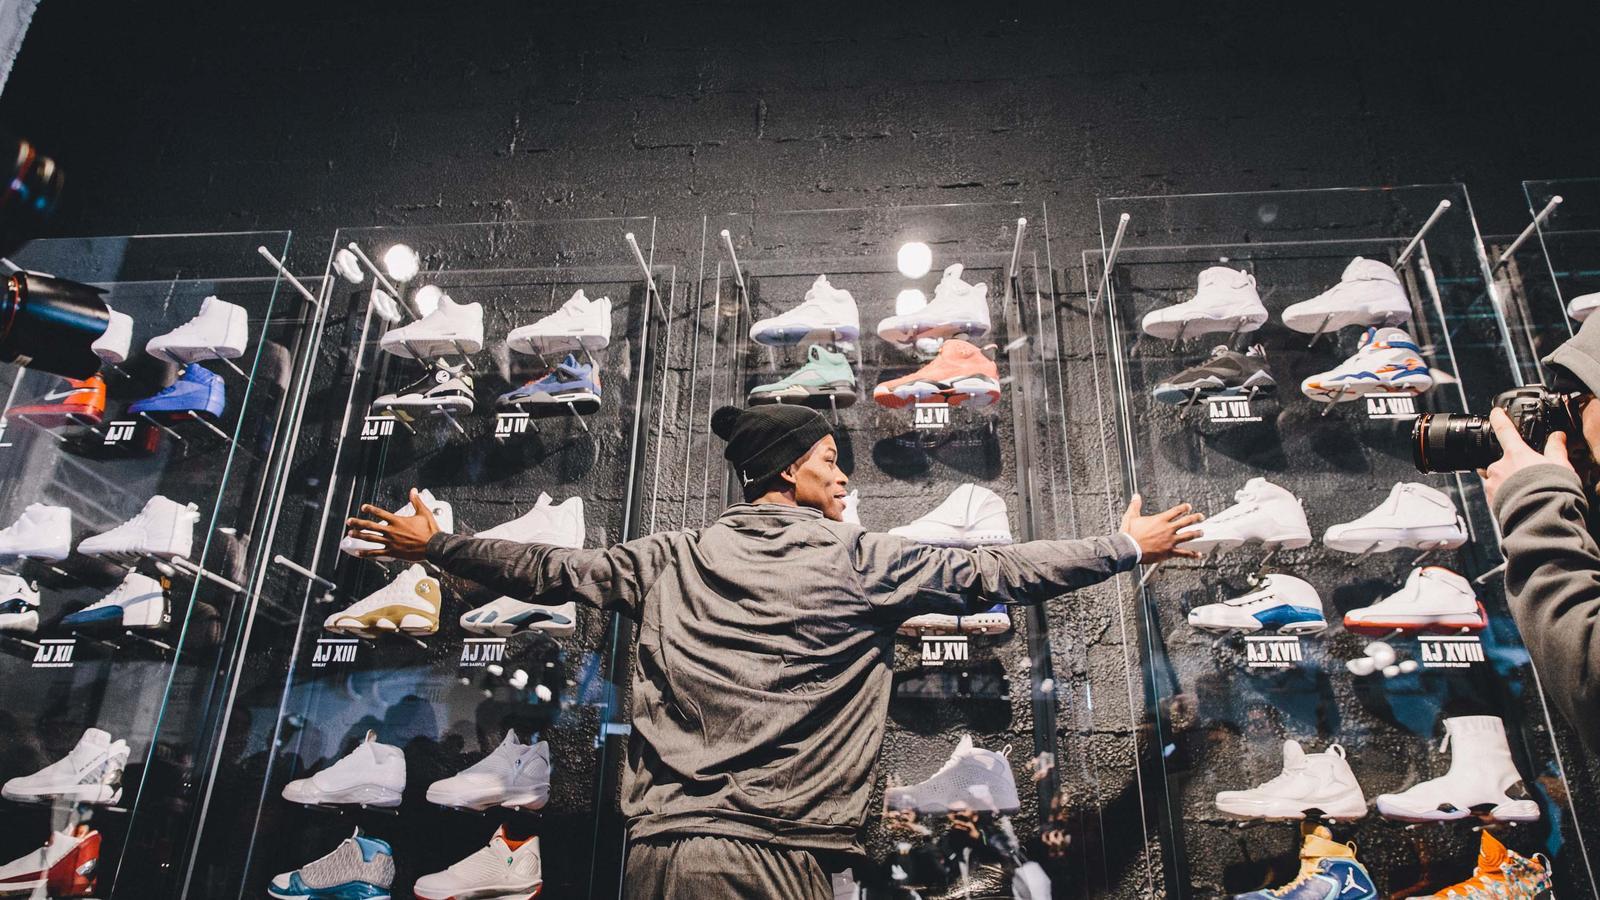 Jordan Brand Will Open Their First Permanent Store In Toronto